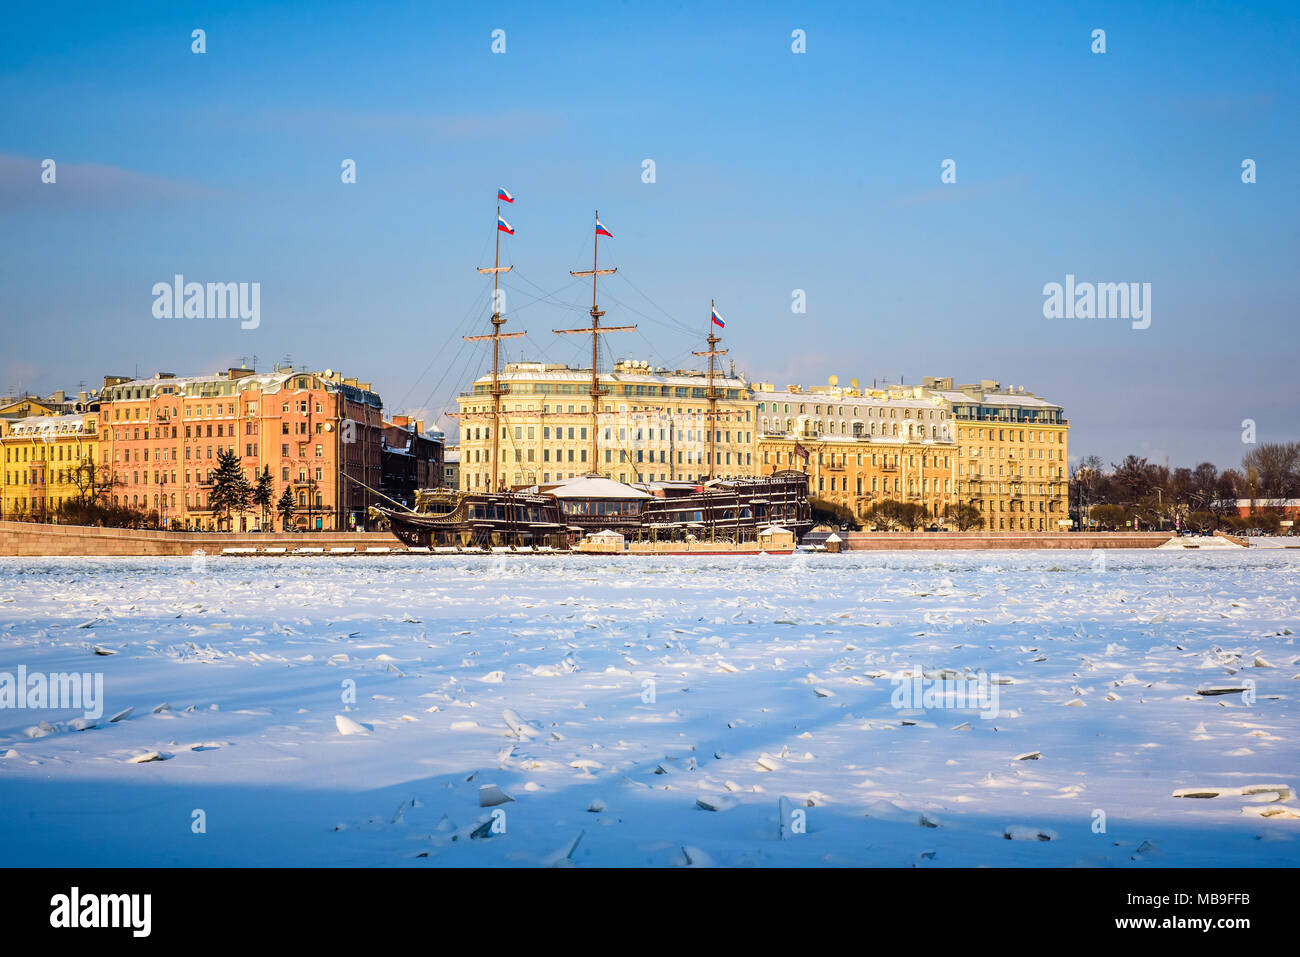 St. Petersburg, Russia View of Letuchiy Gollandets Stock Photo